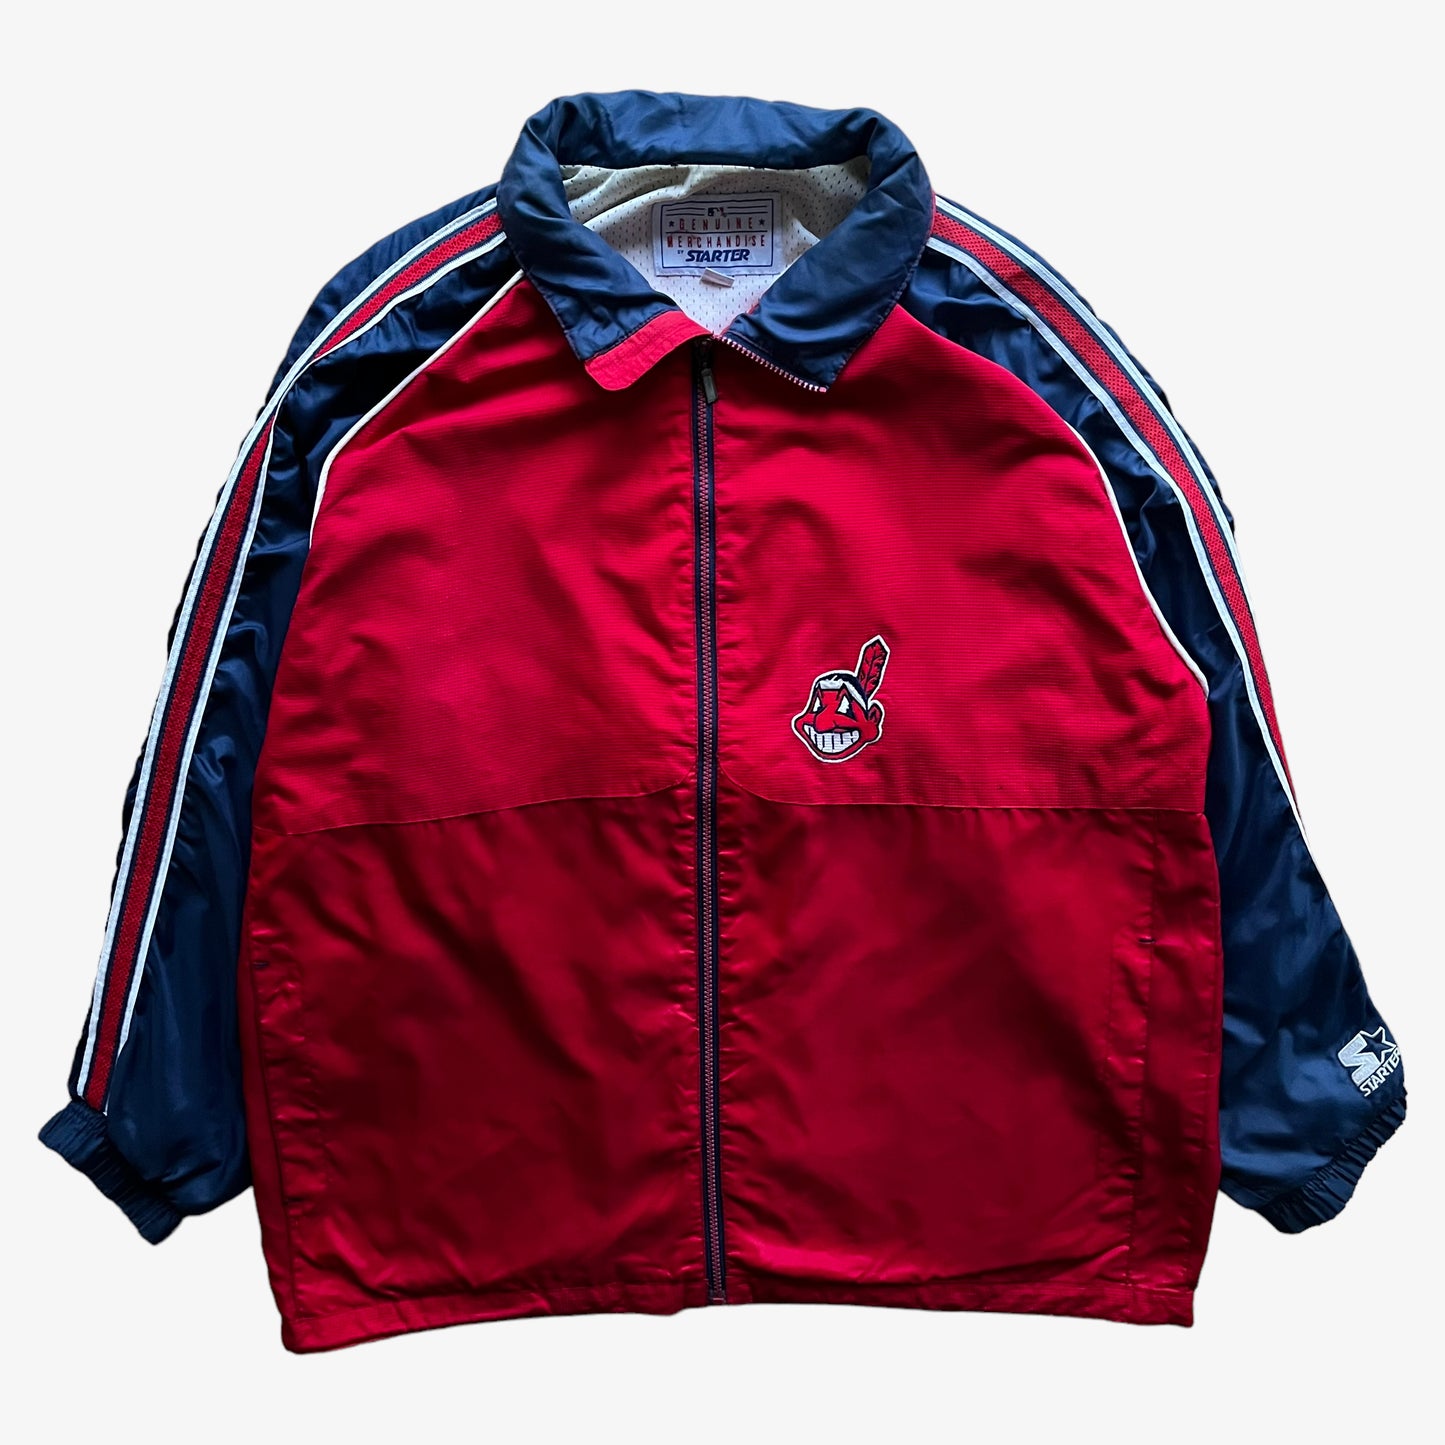 Vintage 90s Starter MLB Cleveland Indians Jacket With Back Spell Out - Casspios Dream